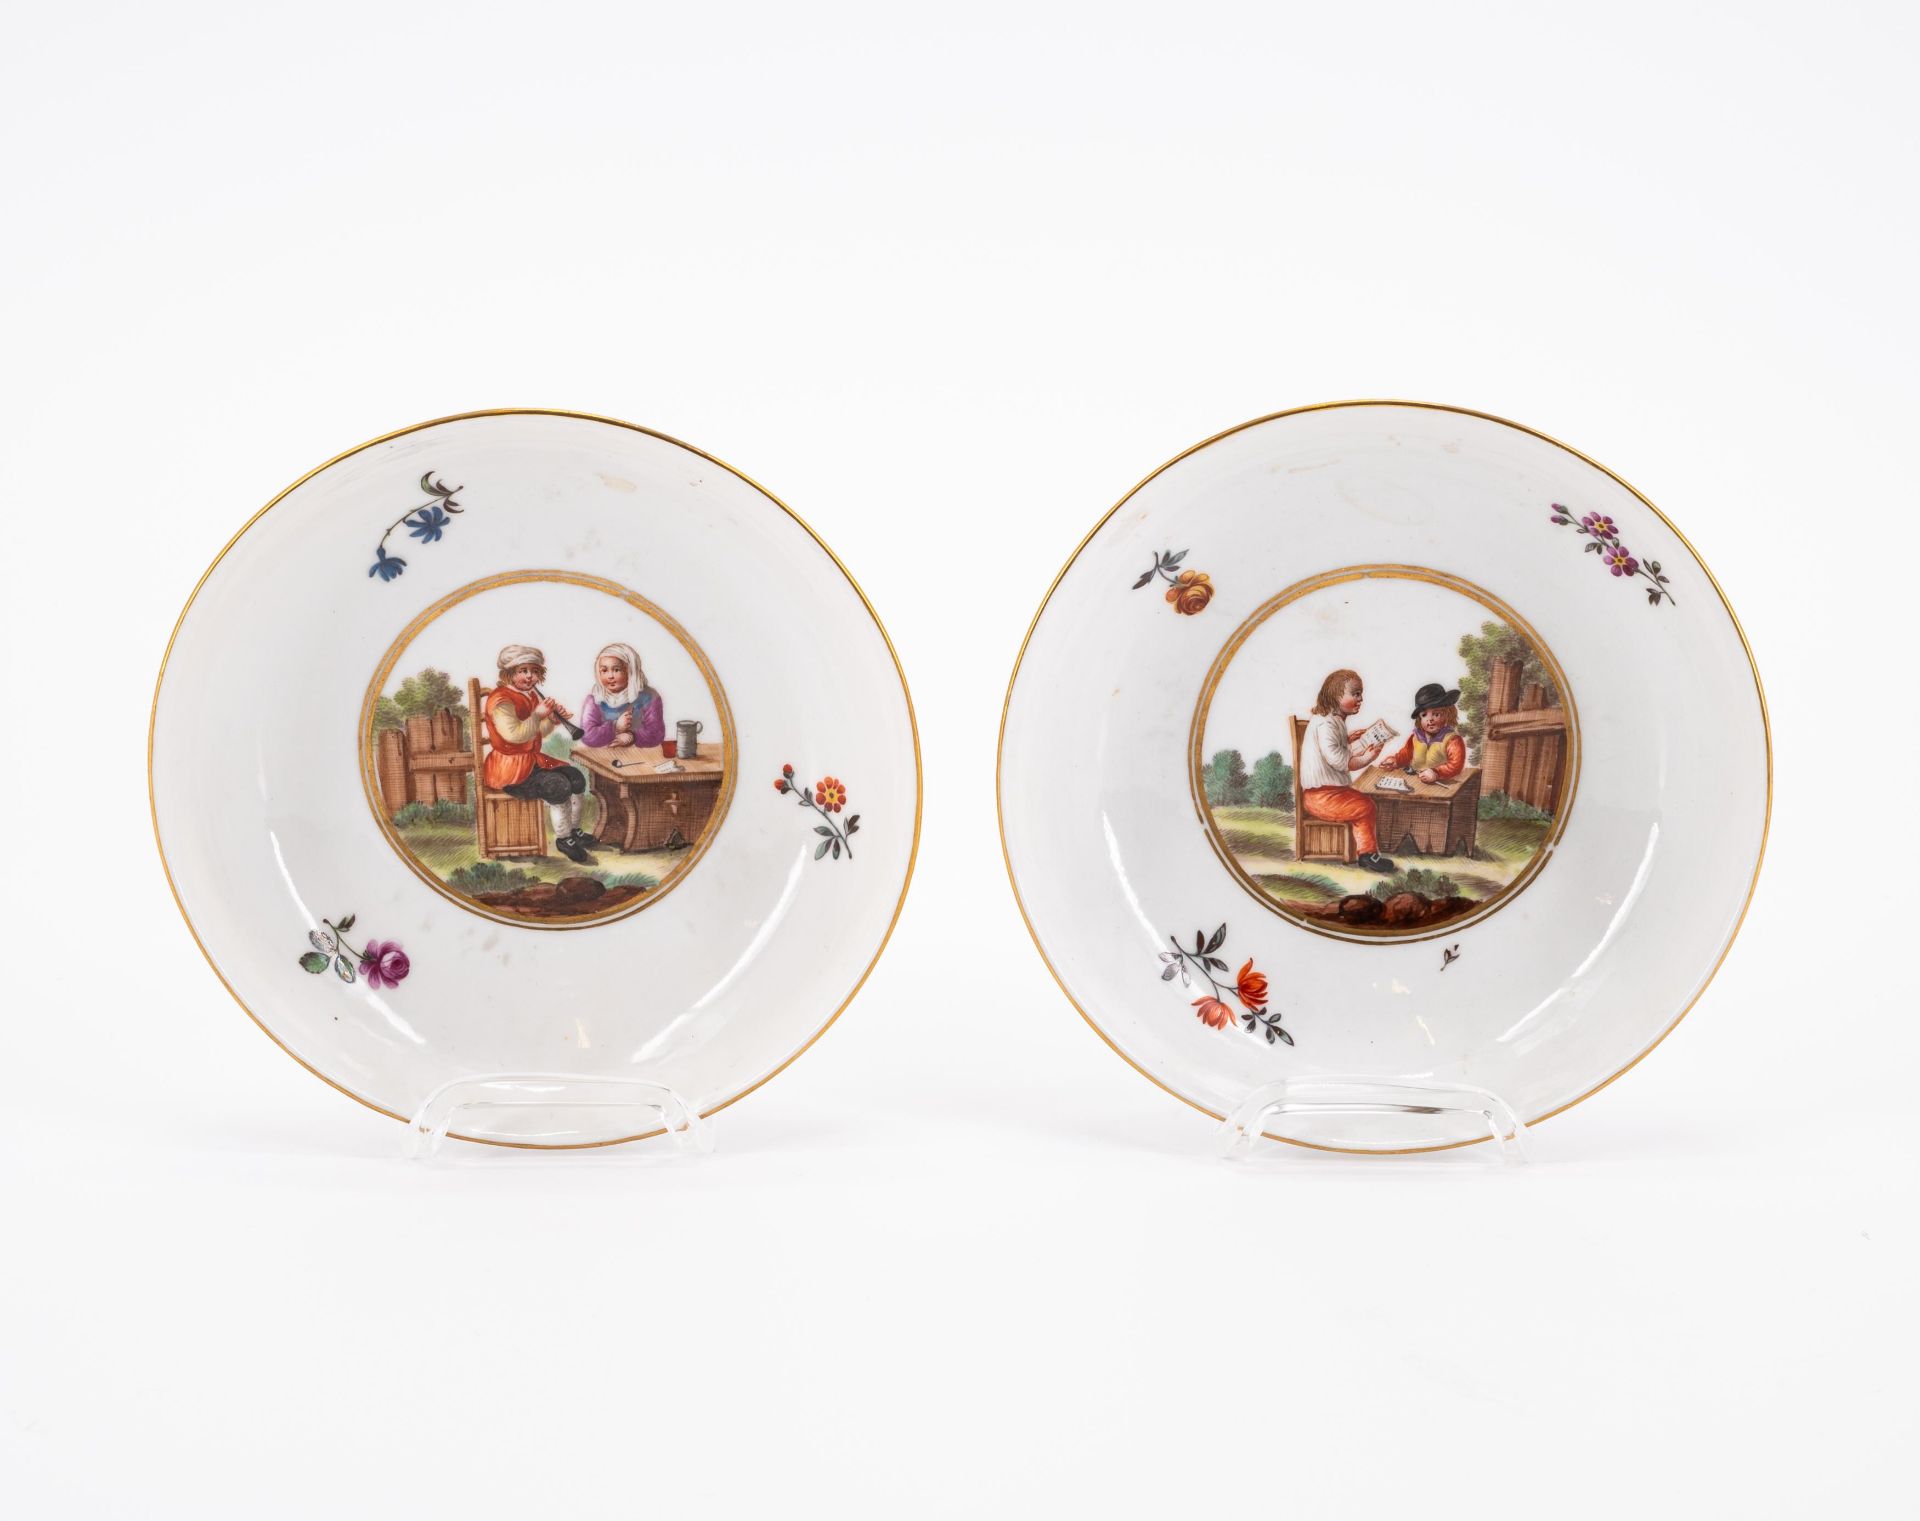 PORCELAIN SLOP BOWL, THREE CUPS AND SAUCERS WITH FIGURATIVE AND FLORAL DECOR - Image 7 of 22